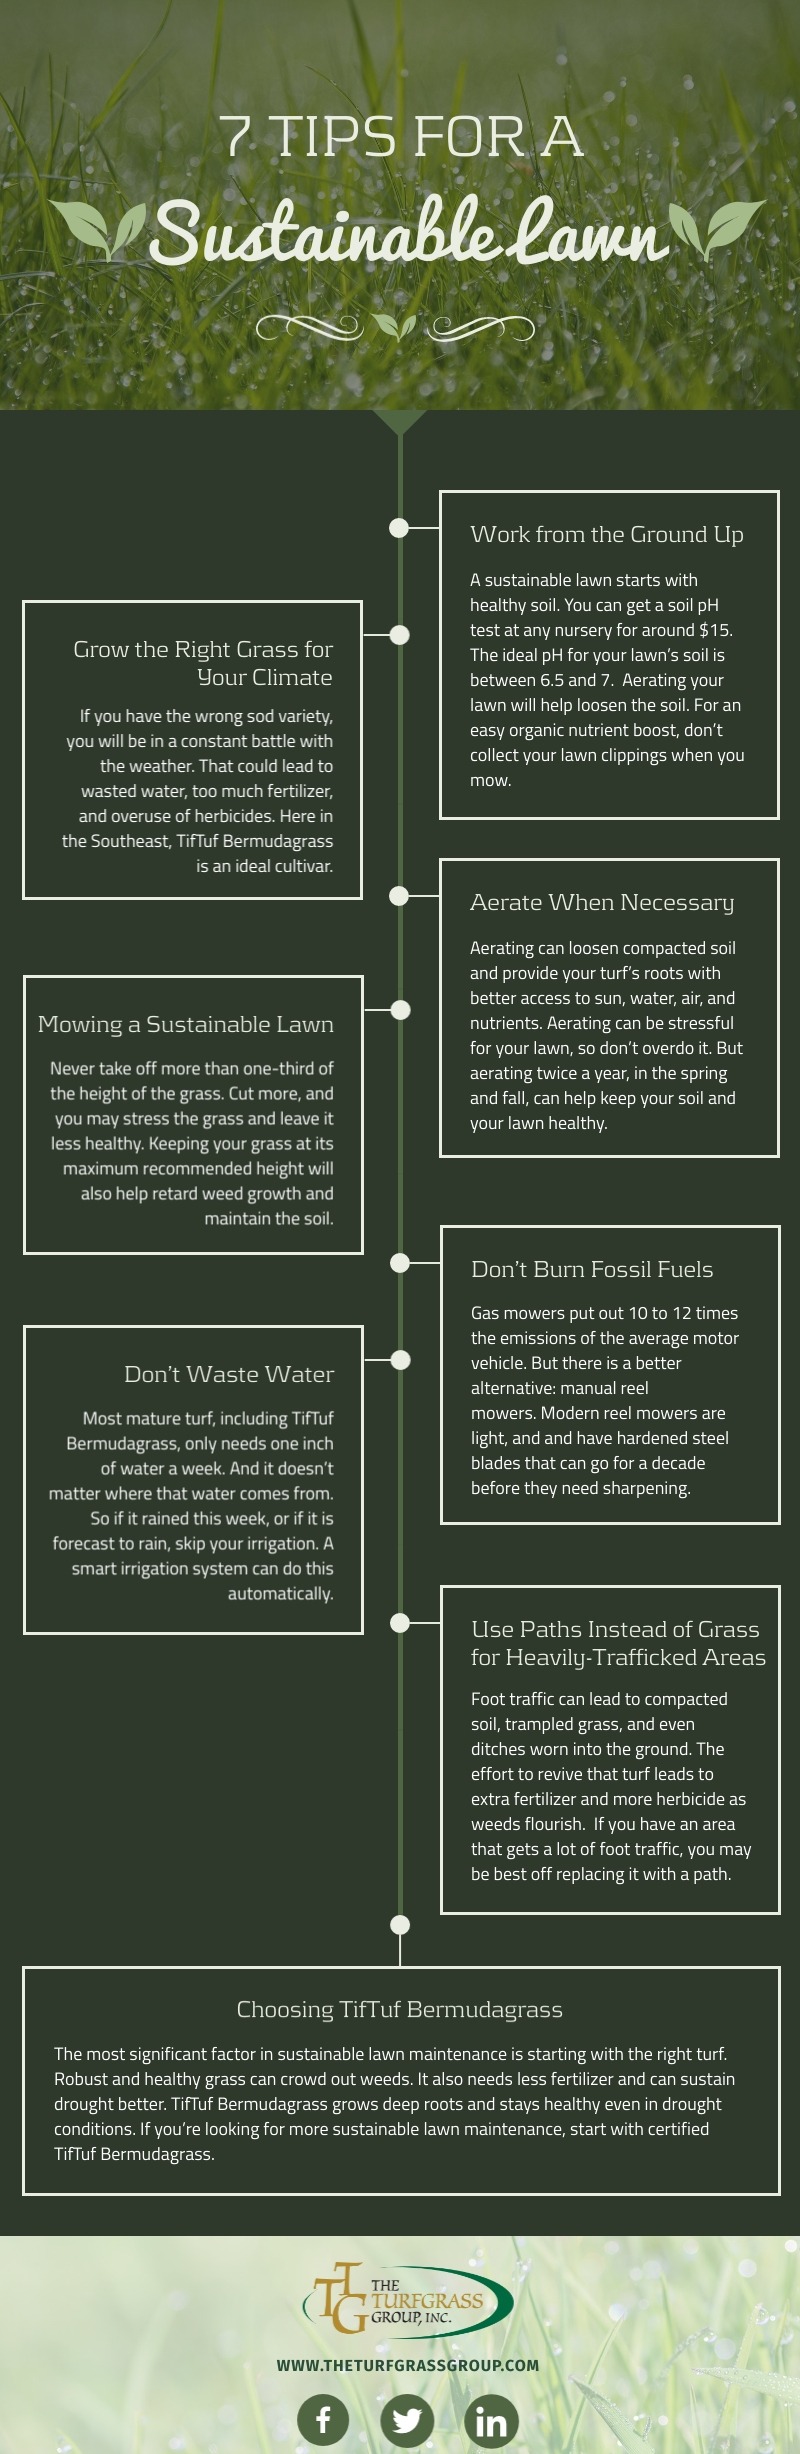 7 Tips for a Sustainable Lawn [infographic]